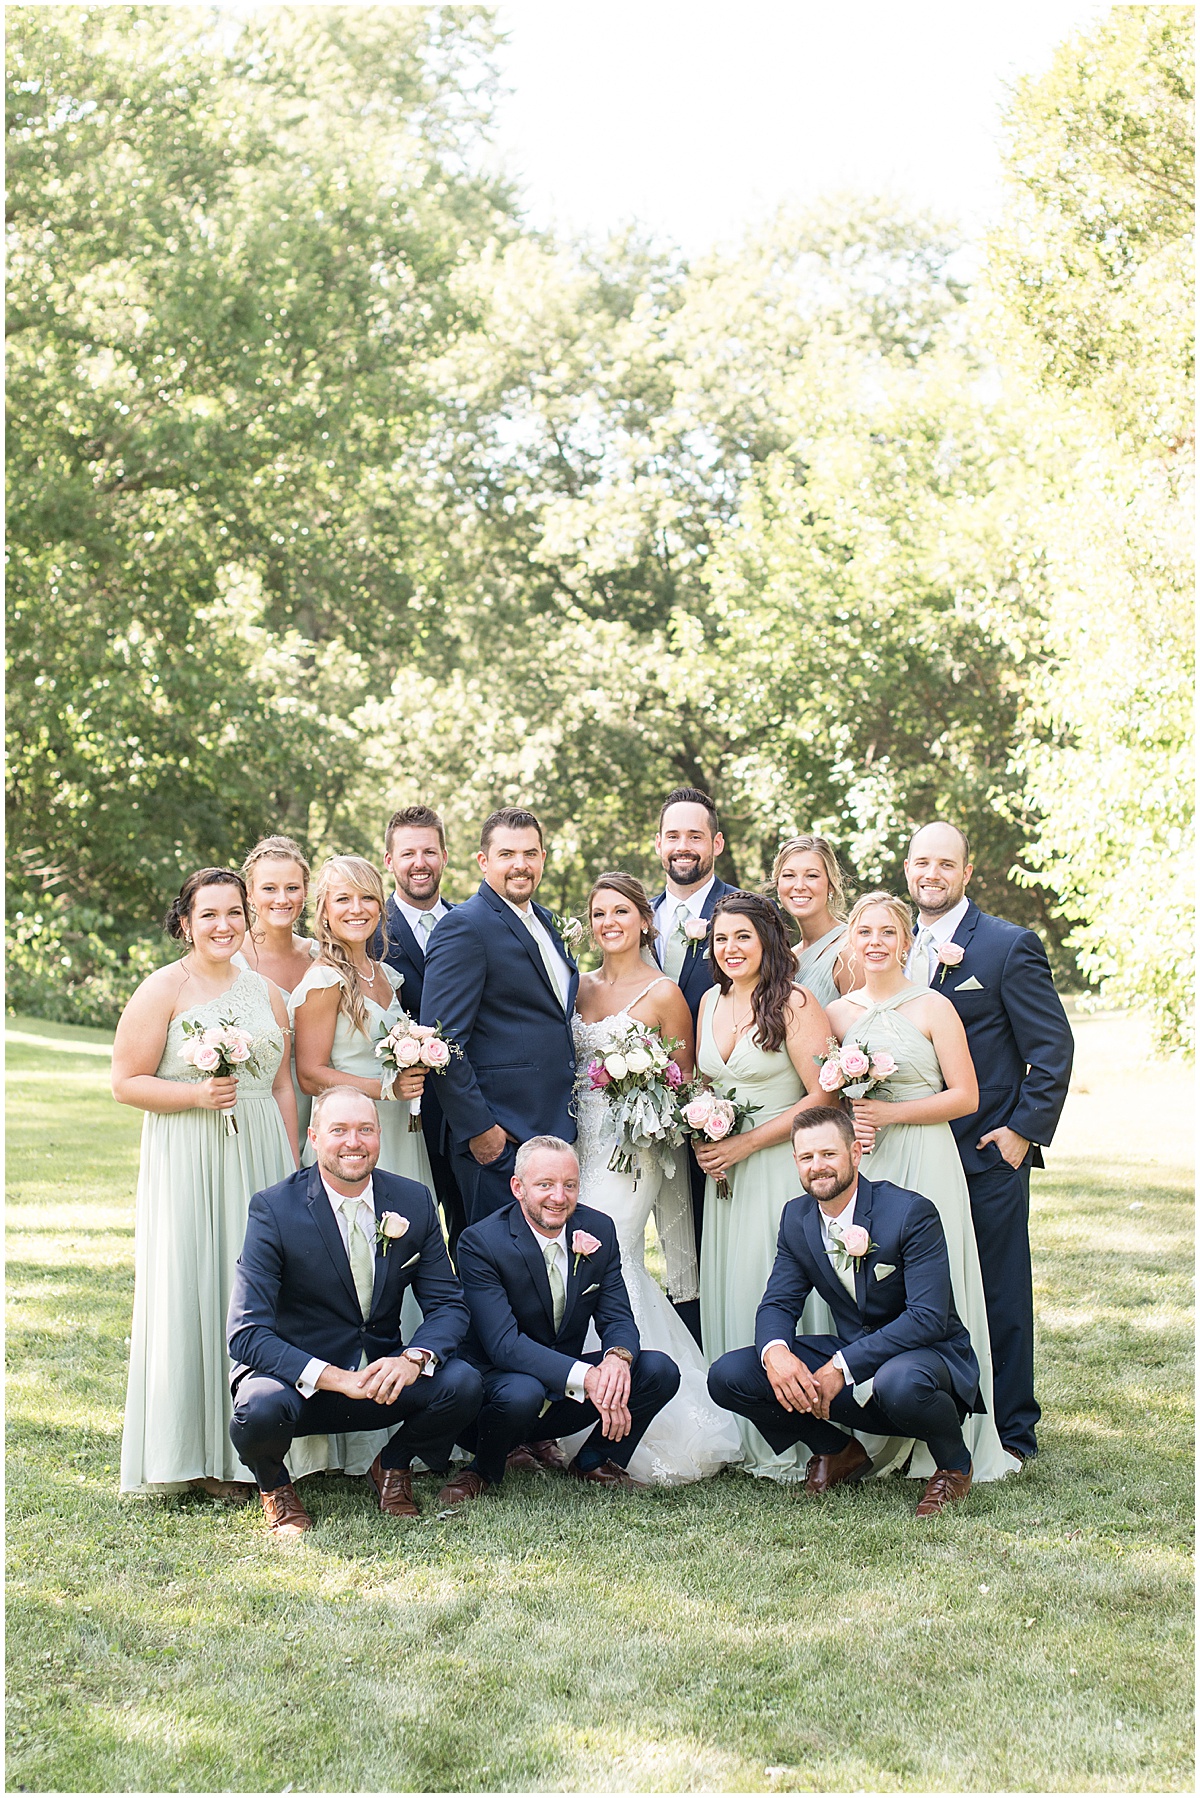 Bridal party at Rensselaer, Indiana wedding